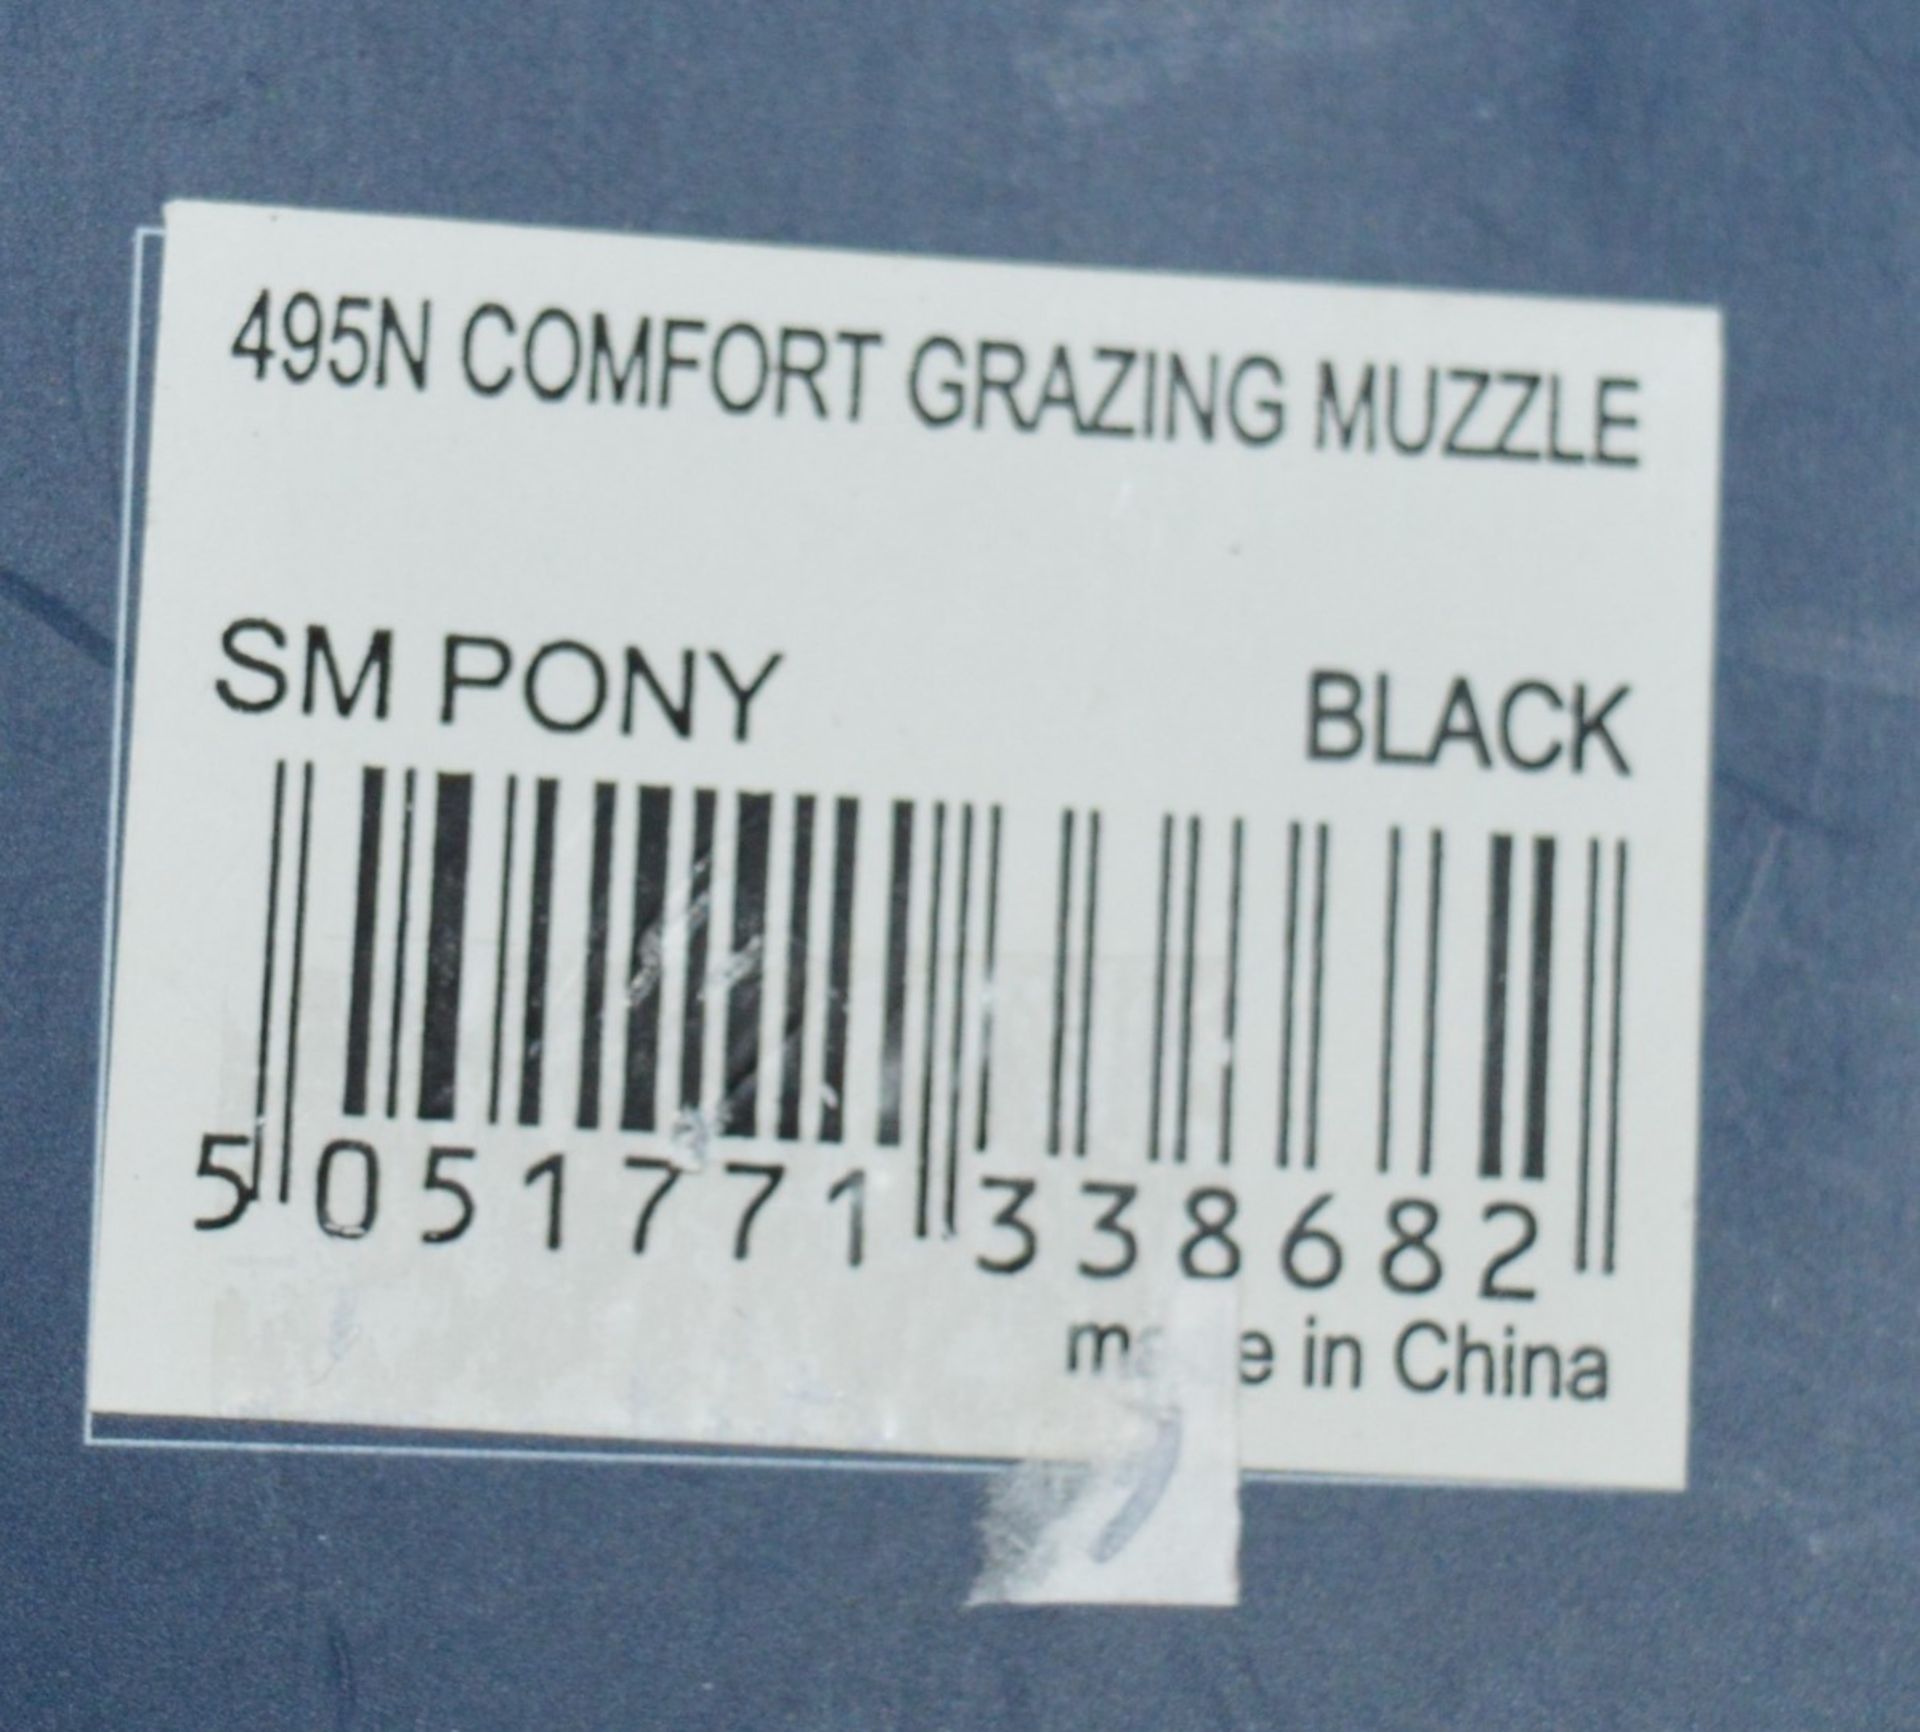 1 x Shires Comfort Grazing Muzzle - Small Pony 495N Black - New Stock - CL401 - Ref J891 - Location: - Image 3 of 3